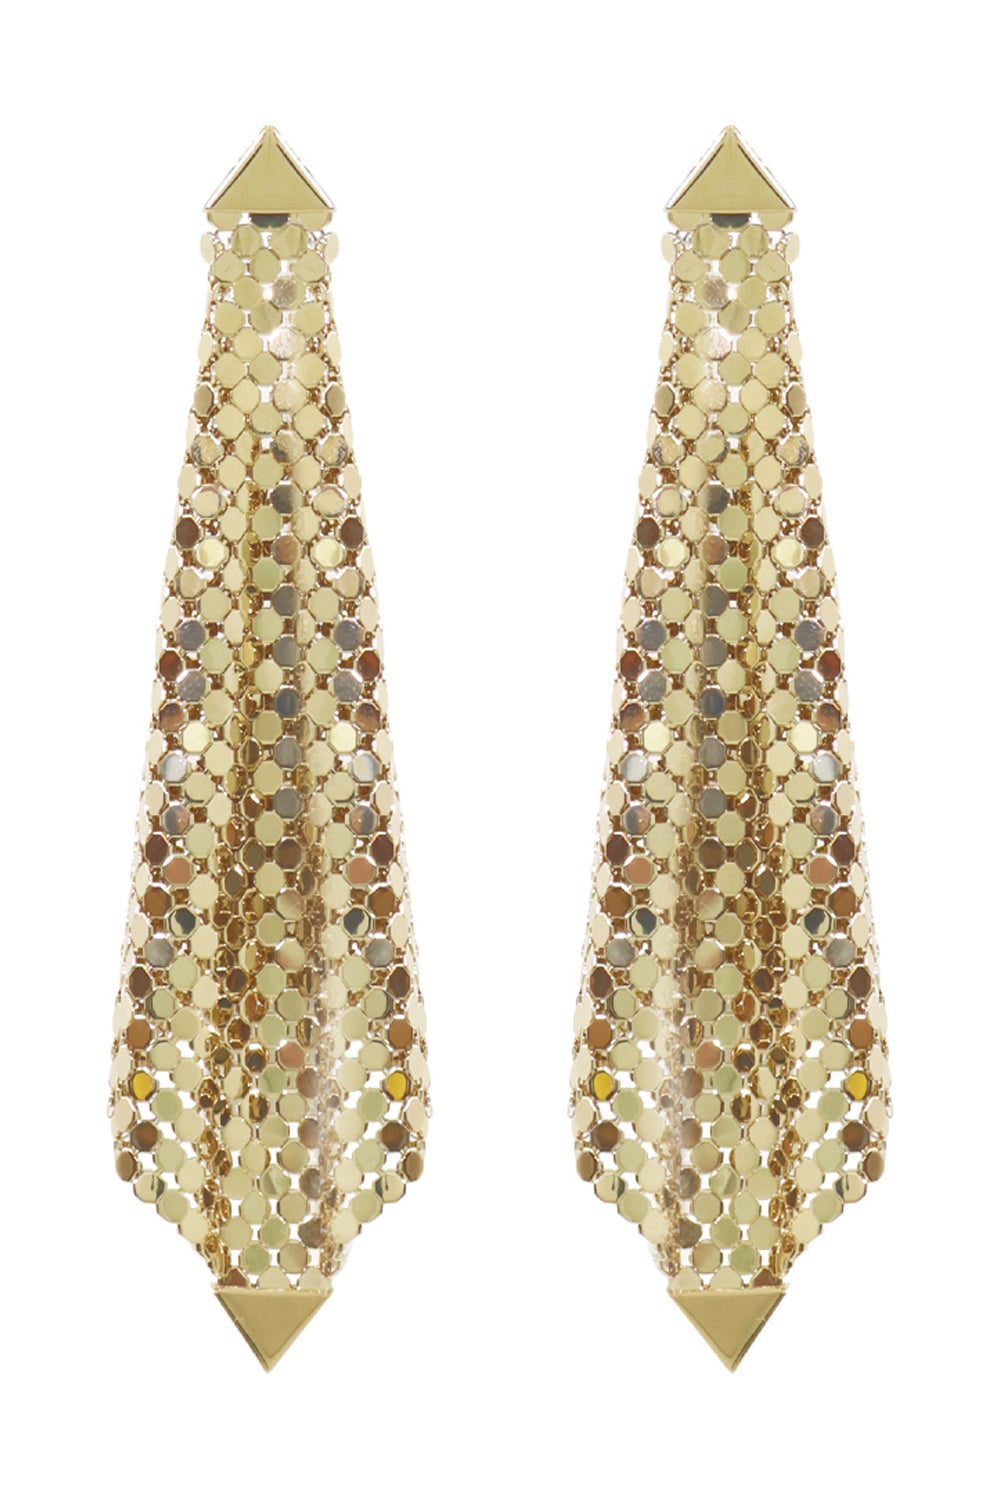 PACO RABANNE ACCESSORIES GOLD PIXEL MESH EARRING | GOLD